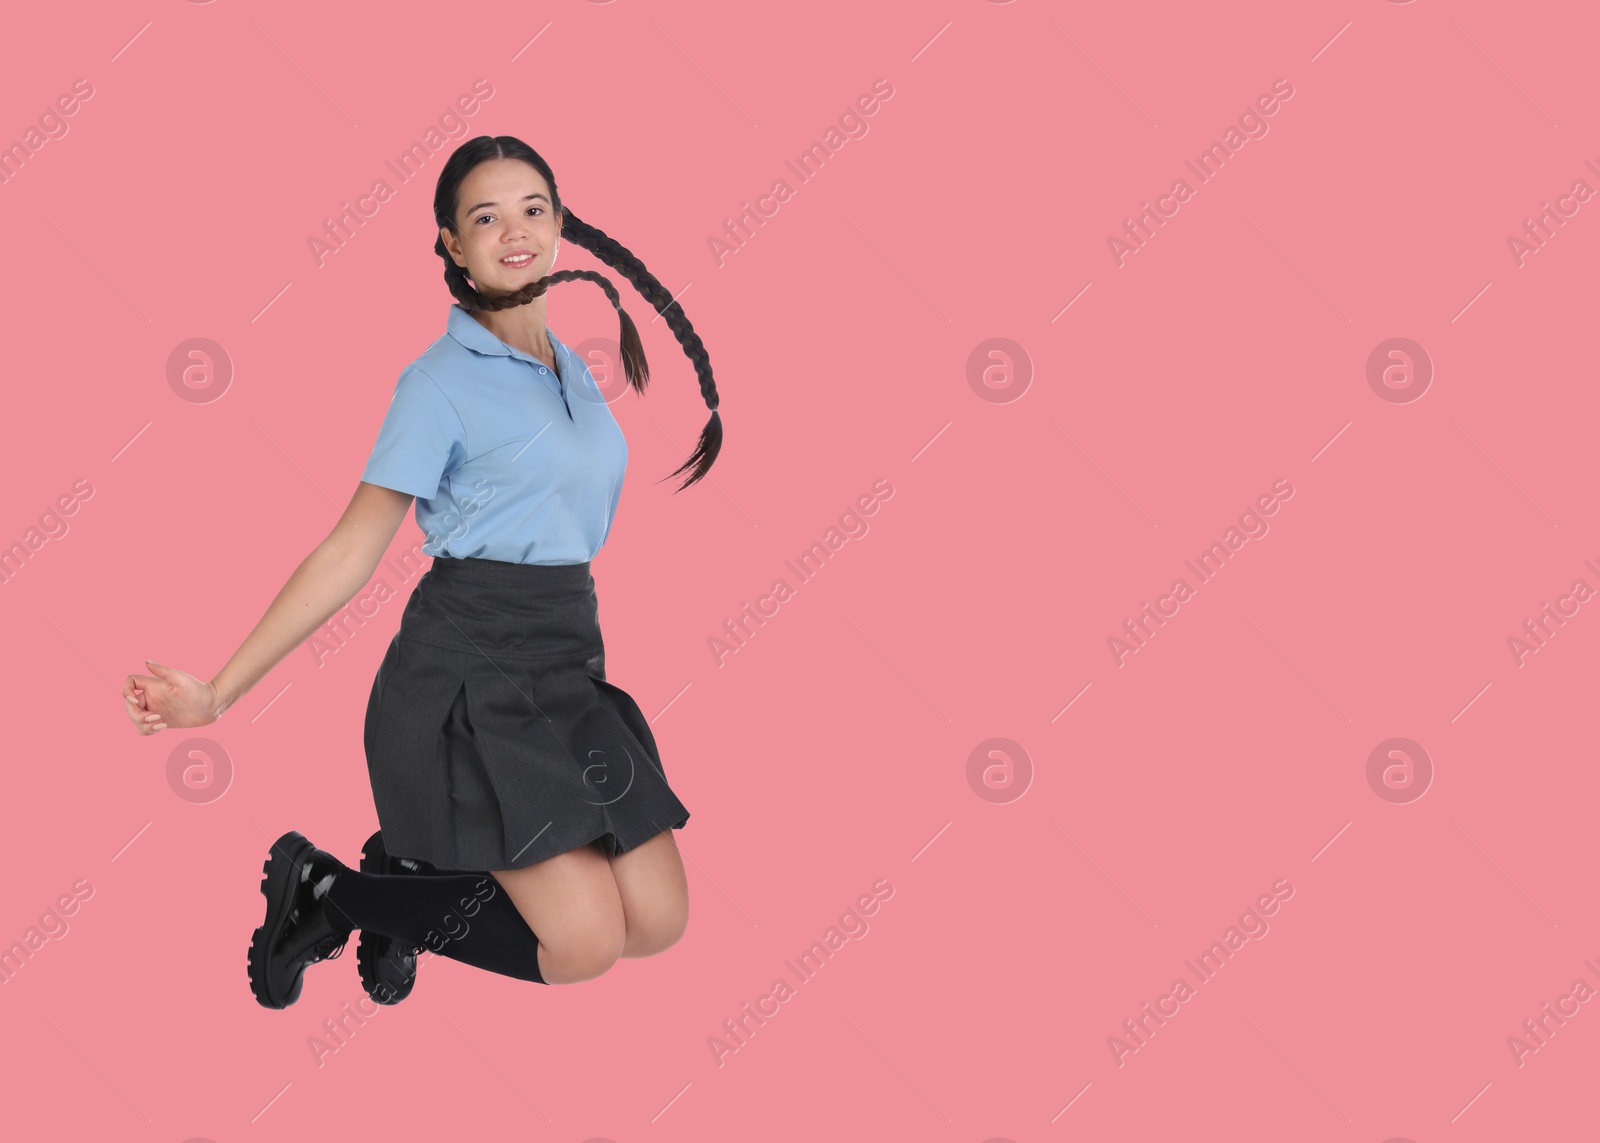 Image of Happy girl in school uniform jumping on pink background, space for text